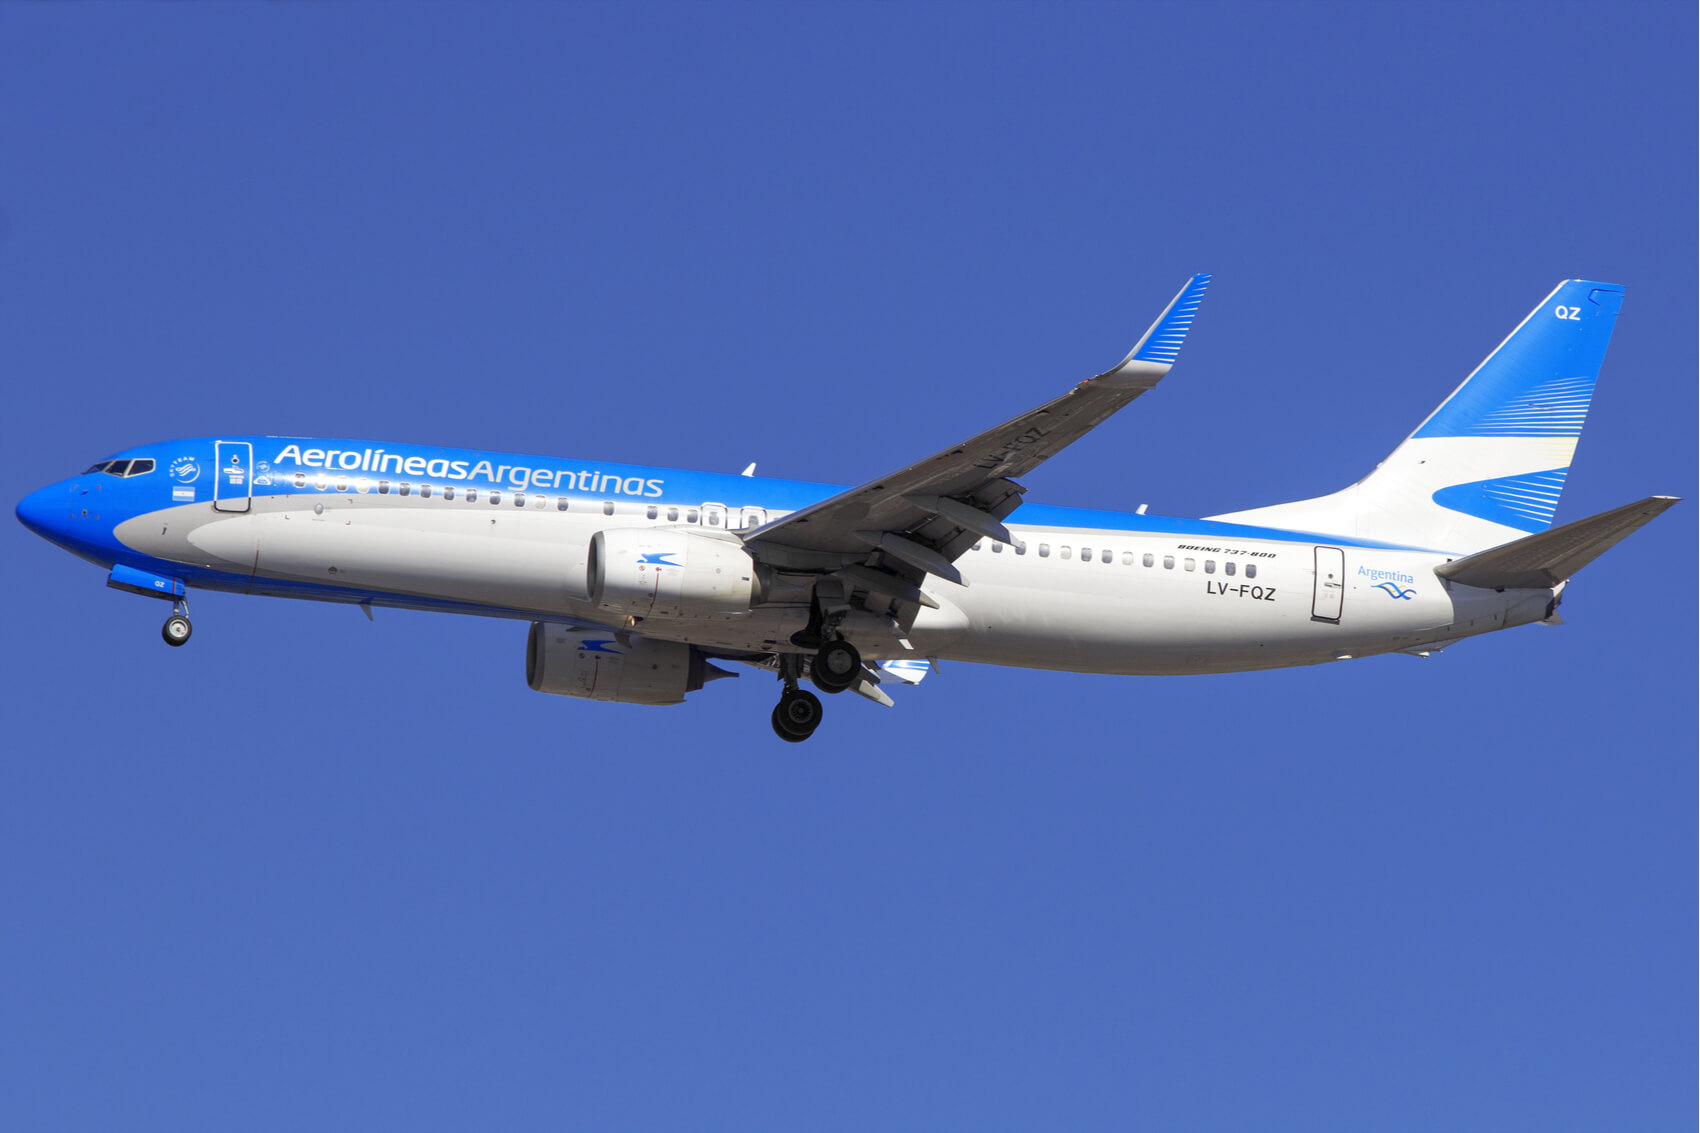 Aerolineas Argentinas, the country's largest airline, is a state-owned company and can survive the crisis as long as the government is able to subsidize its spending.